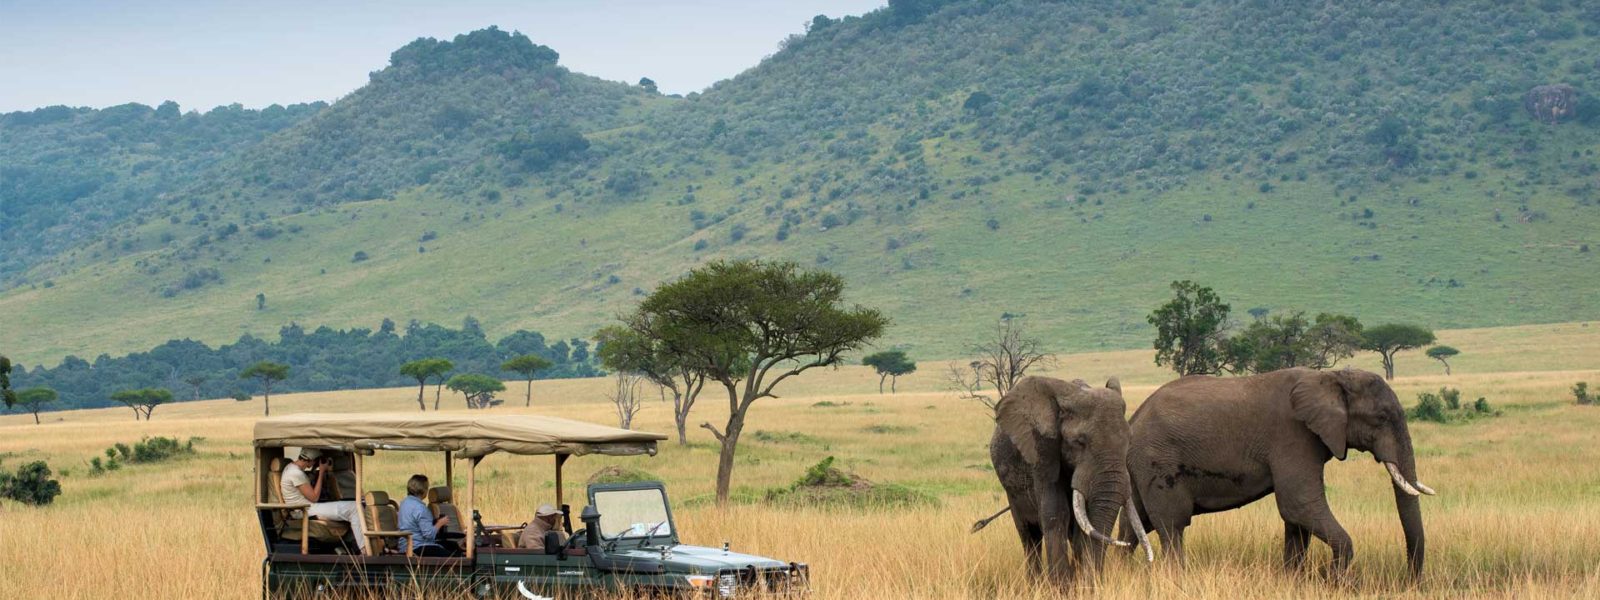 About the Masai Mara game Reserve